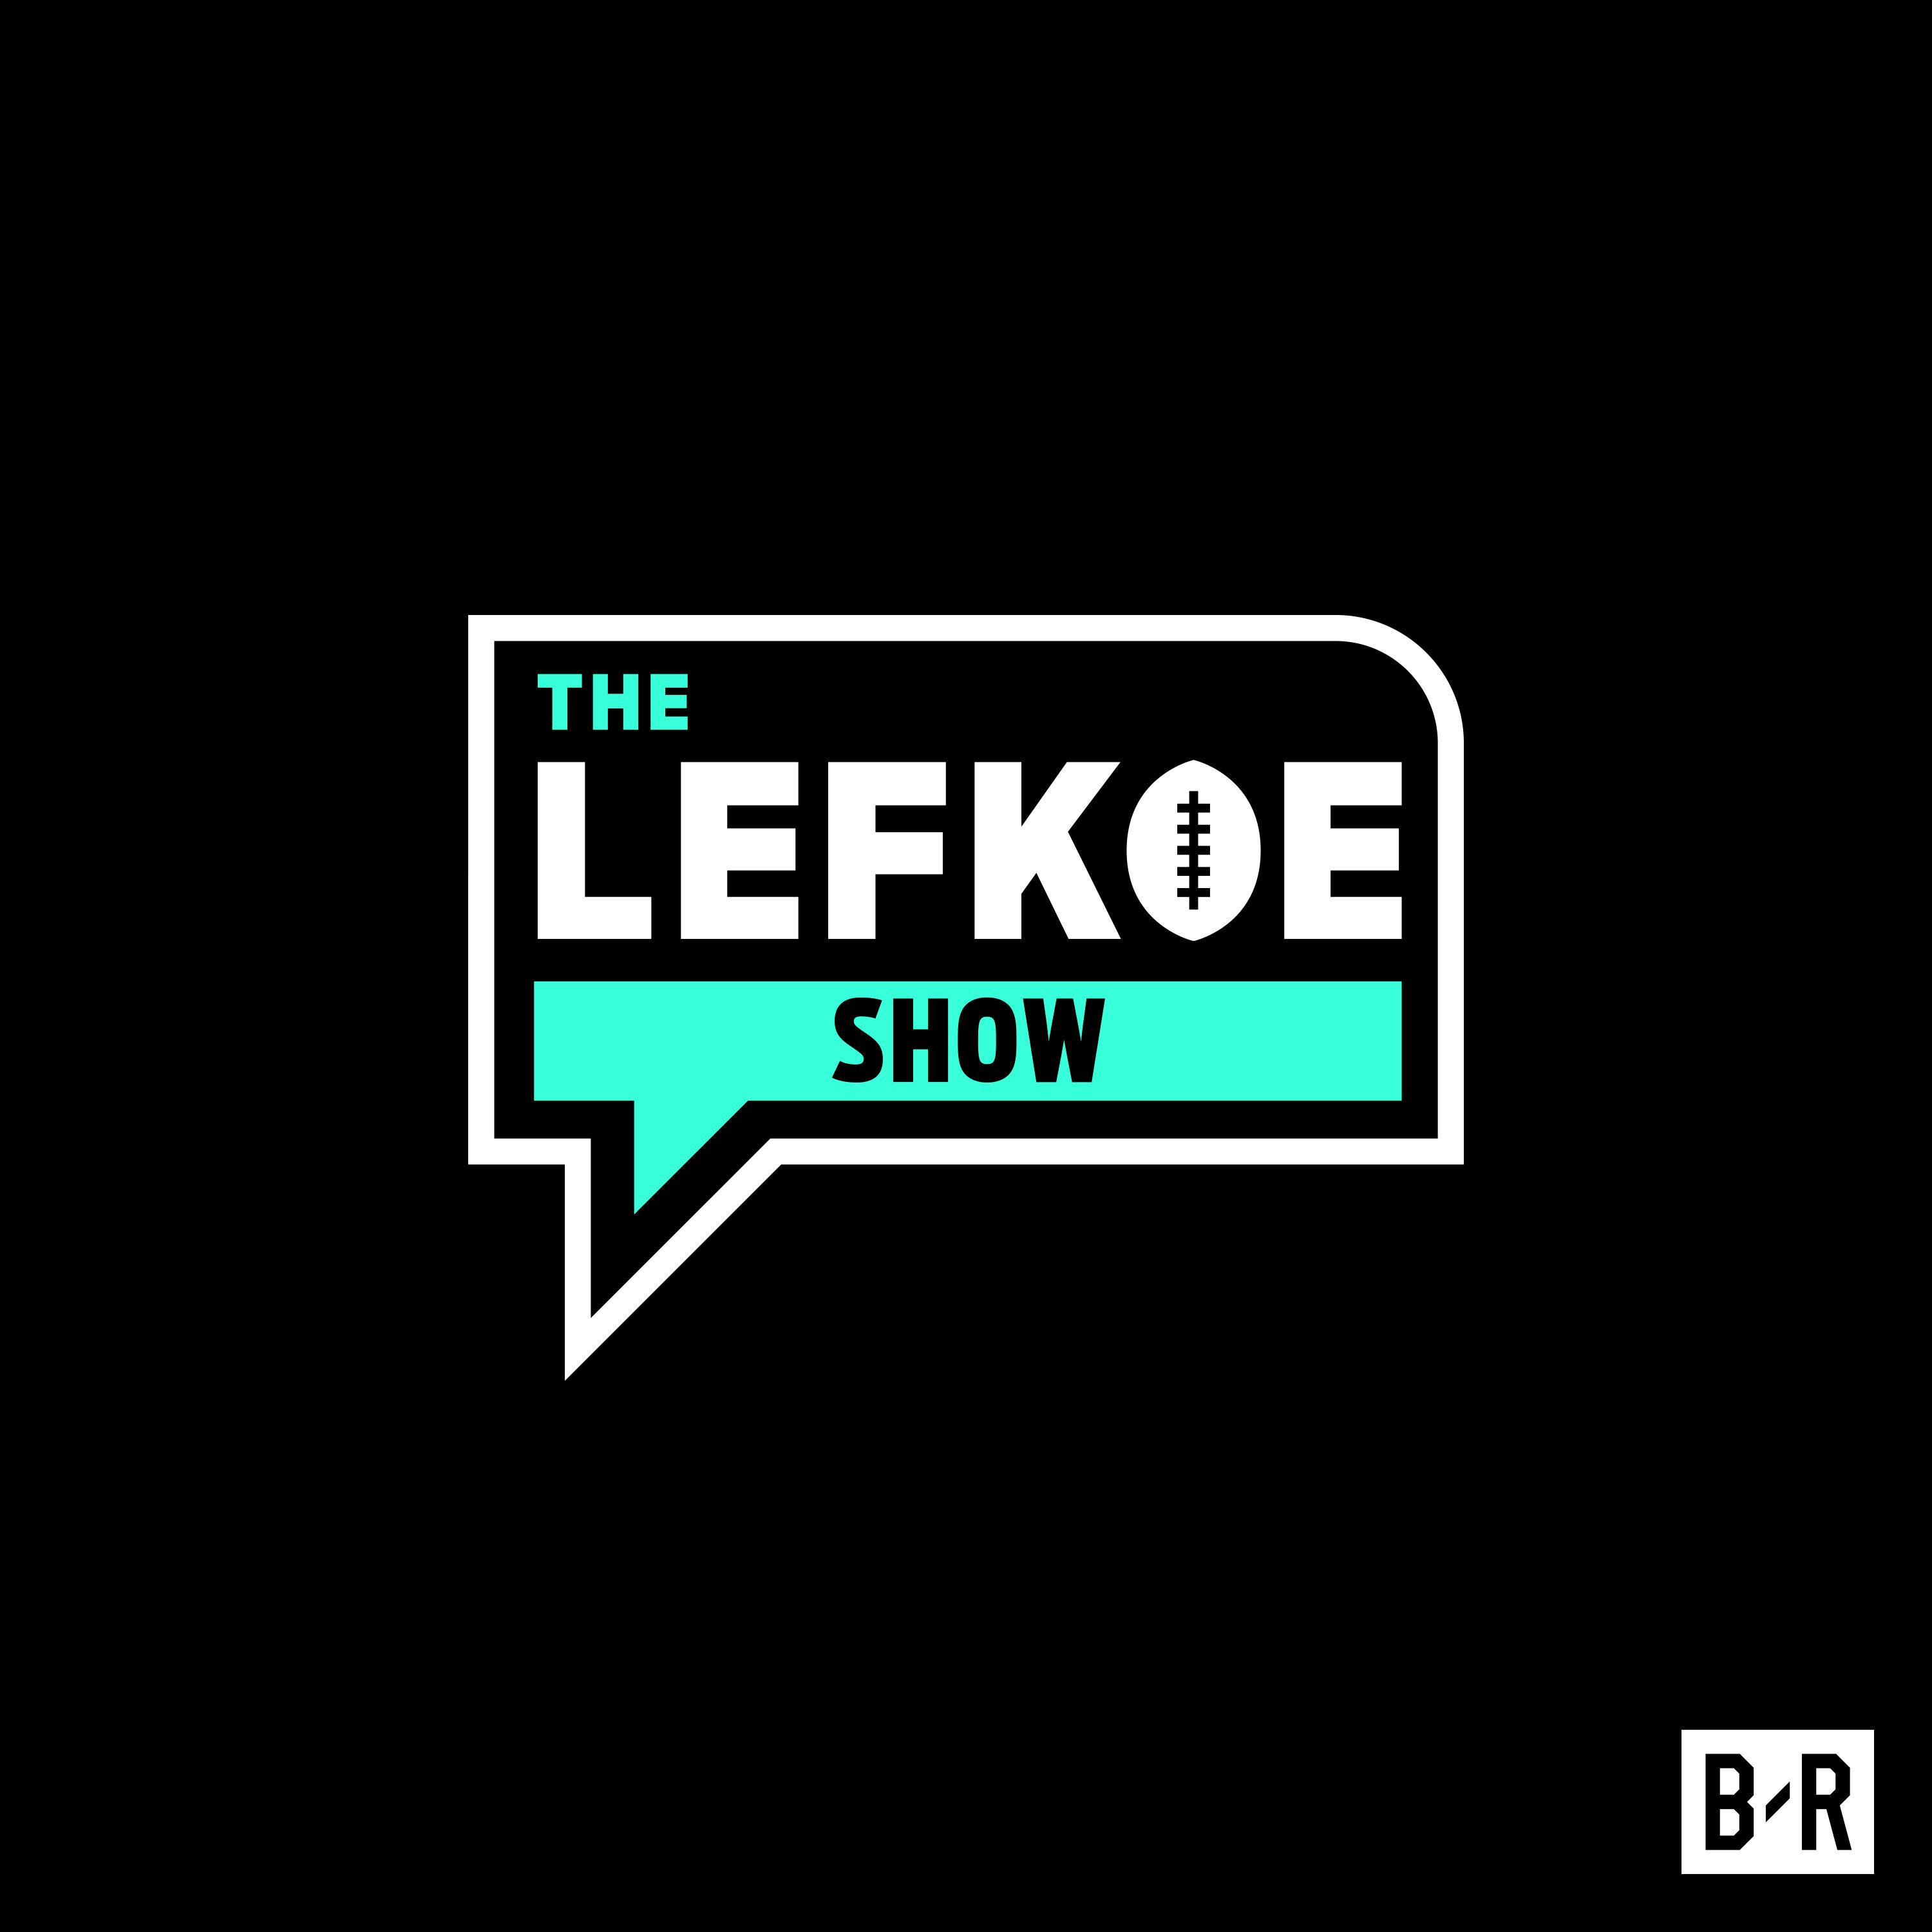 Charles Barkley, the Interview GOAT, on MJ, the Best Netflix Shows, and The Match | The Lefkoe Show